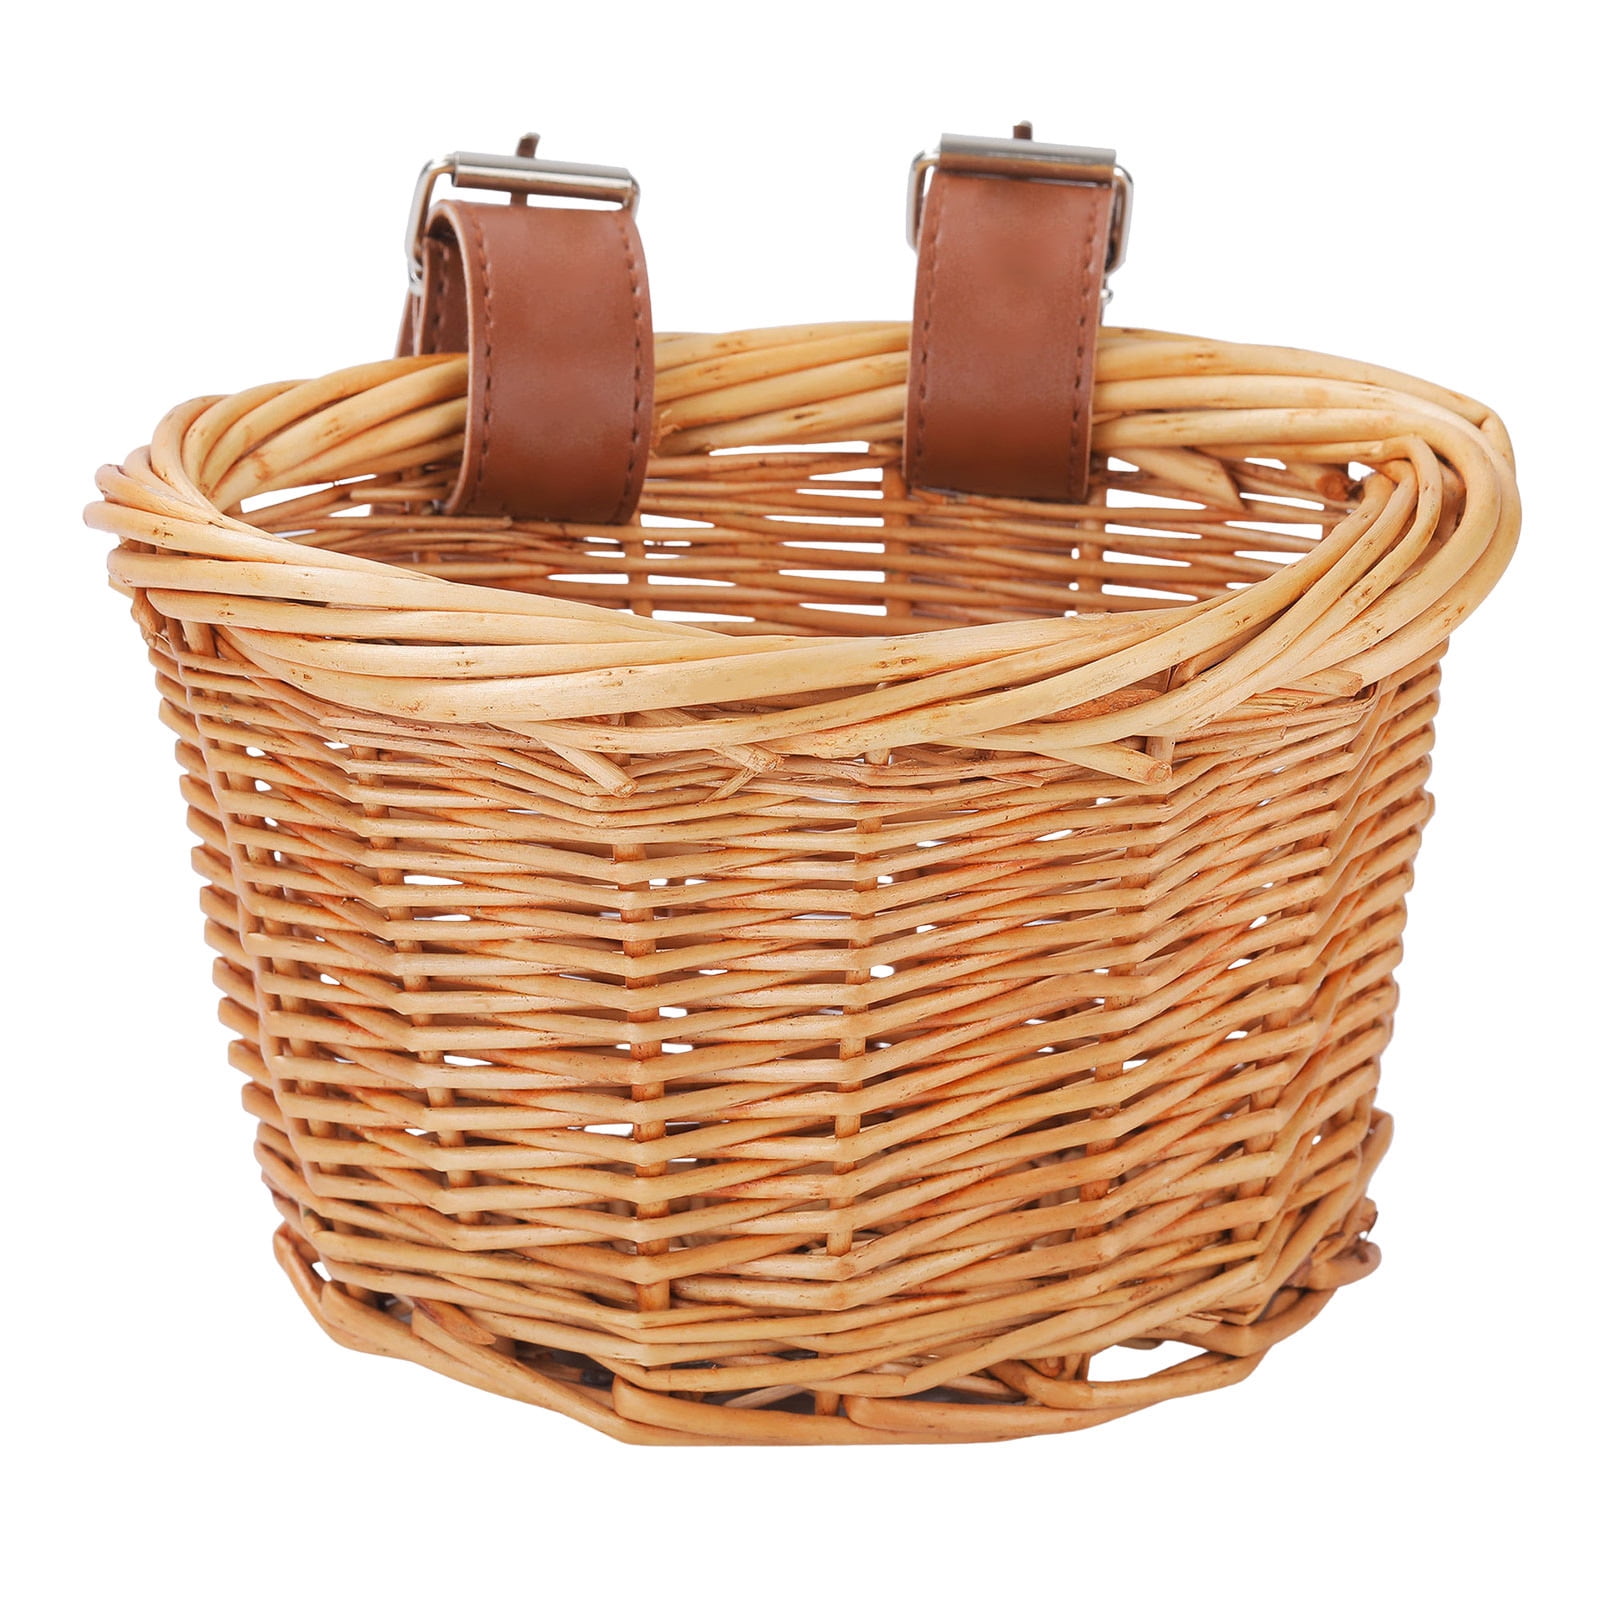 Childrens Bicycle Basket-Hand-Woven Wicker Basket with Leather Straps,Versatility&Waterproof Basket for Students/Children